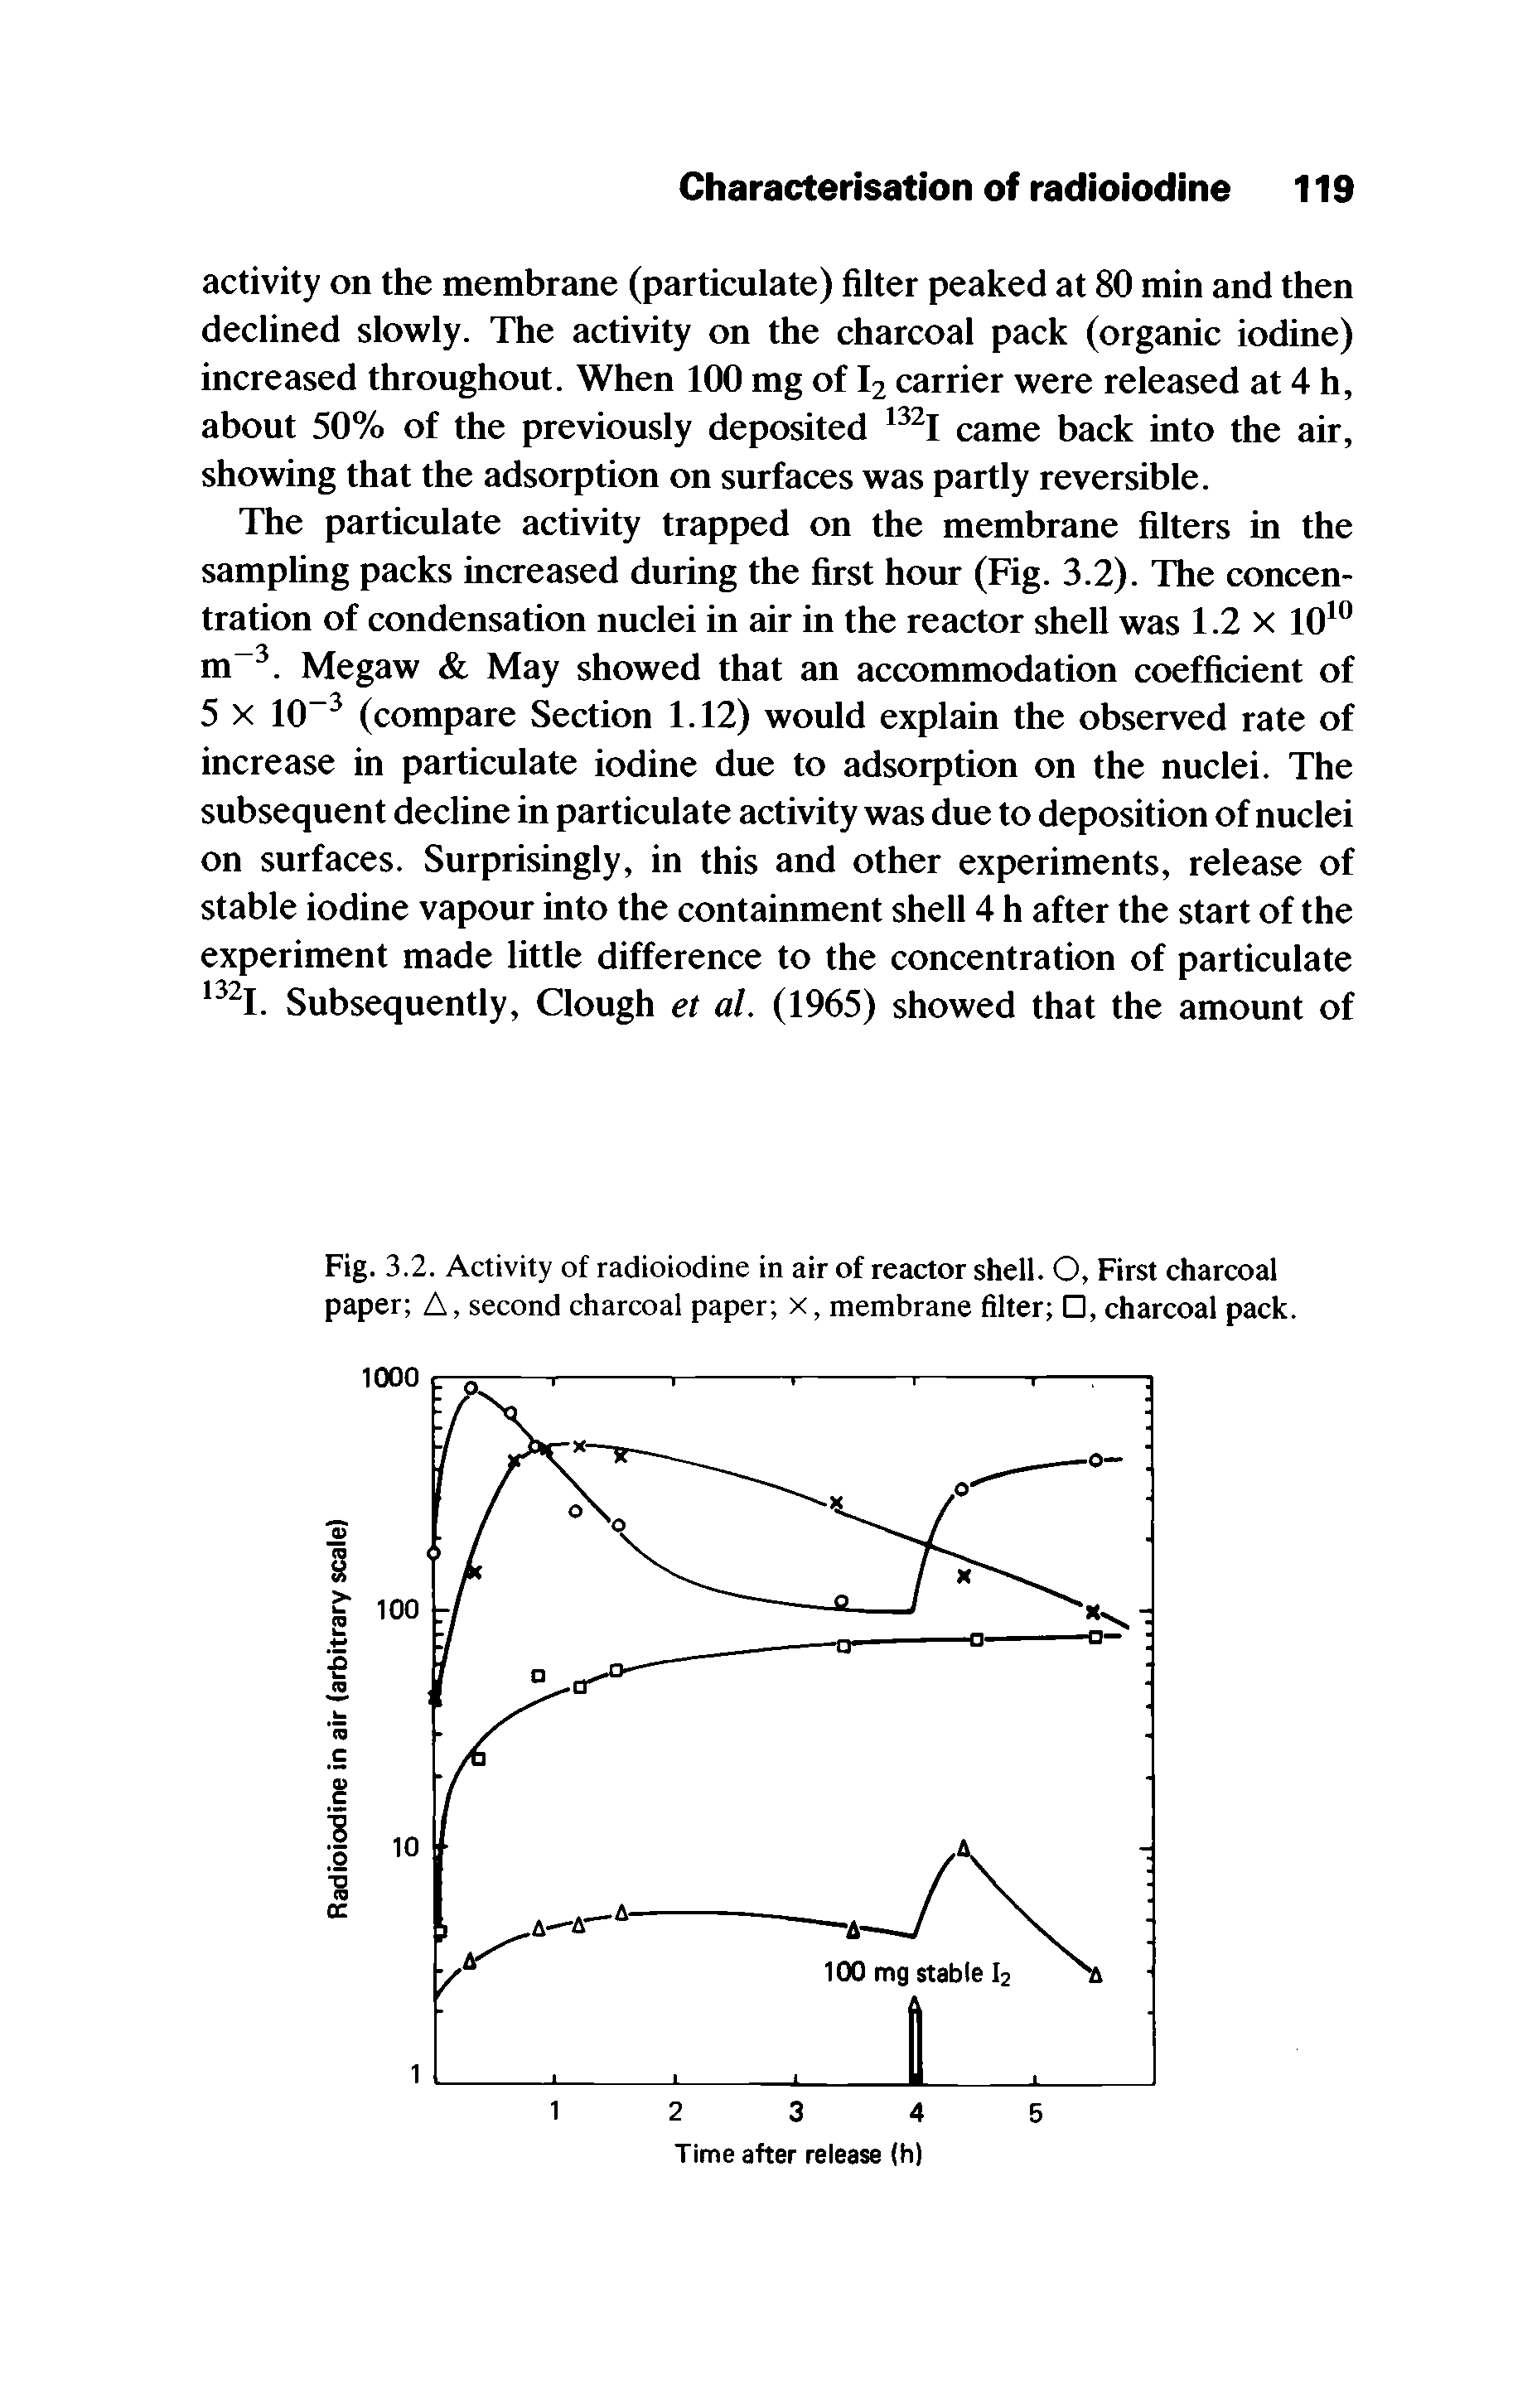 Fig. 3.2. Activity of radioiodine in air of reactor shell. O, First charcoal paper A, second charcoal paper x, membrane filter , charcoal pack.